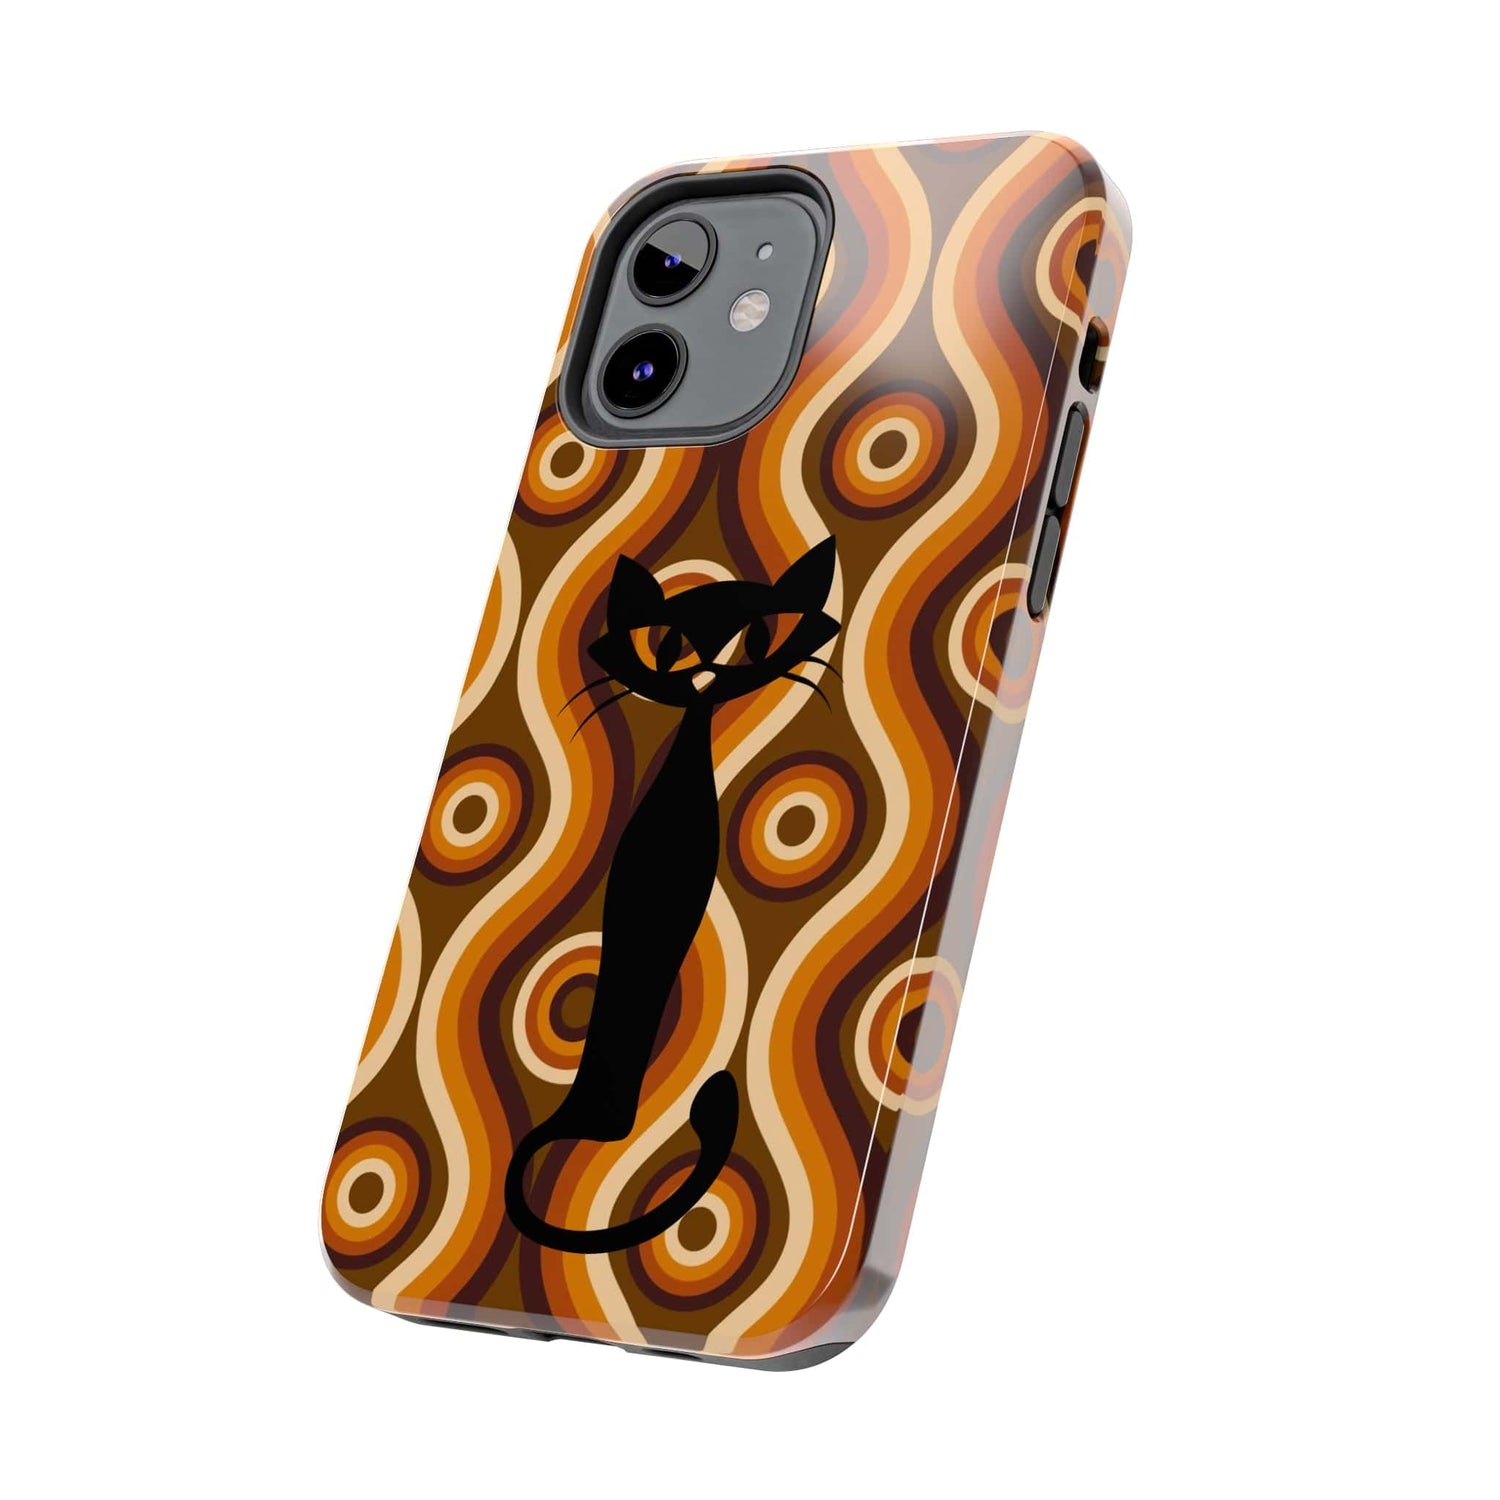 Retro Phone Case, Groovy Brown, Atomic Kitch Cat Tough Smart Phone Cases Phone Case